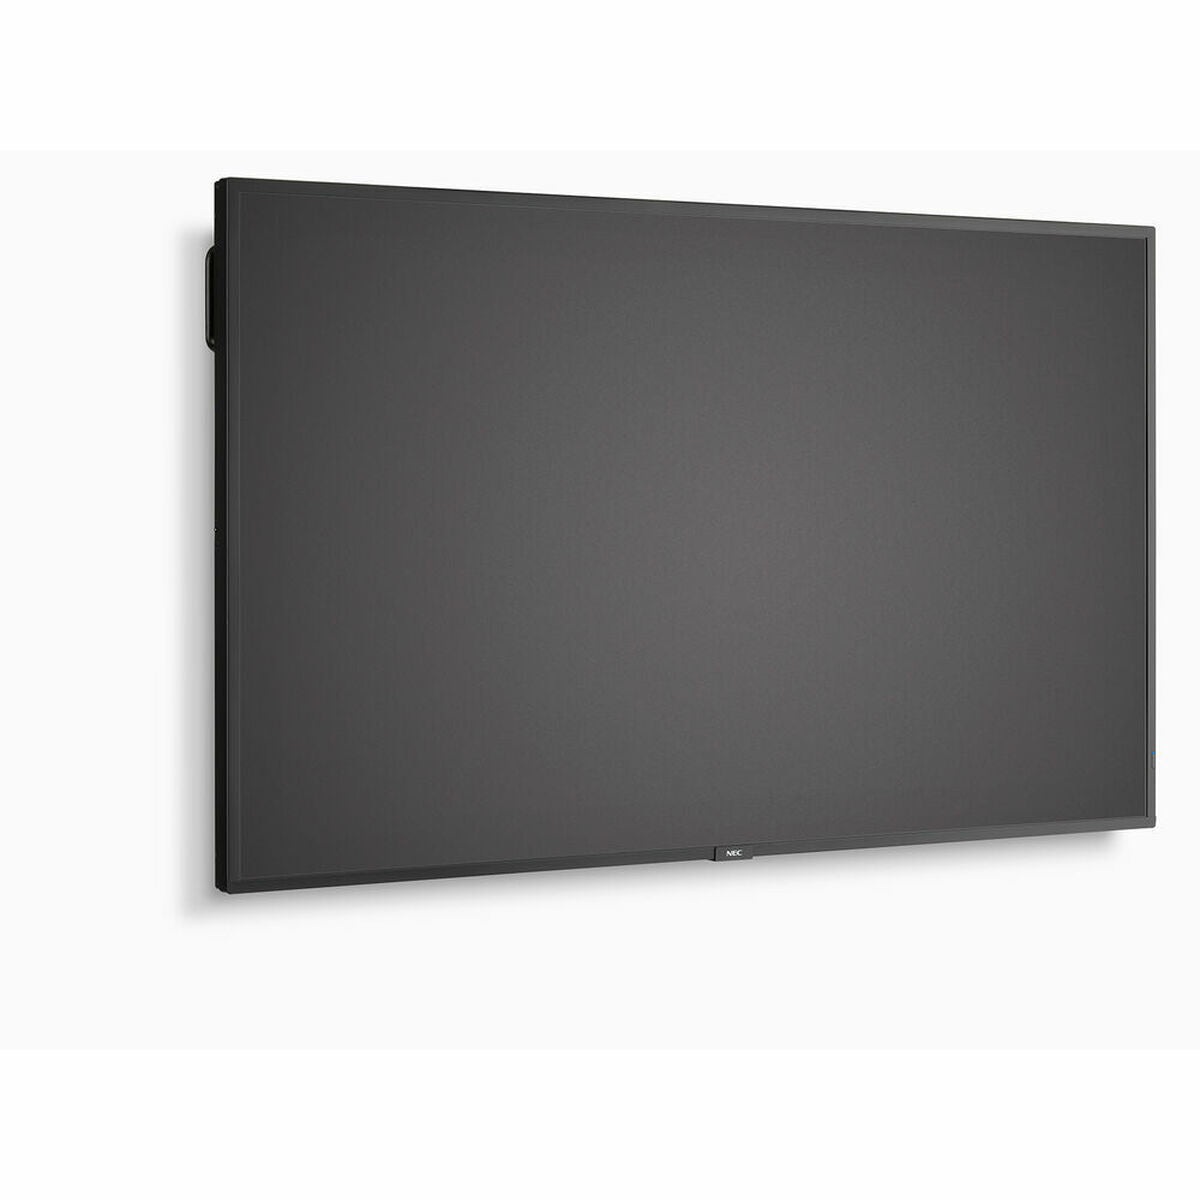 Monitor NEC 60005048 43" 4K Ultra HD LED 43" IPS 50-60  Hz, NEC, Computing, monitor-nec-60005048-43-4k-ultra-hd-led-43-ips-50-60-hz, :Ultra HD, Brand_NEC, category-reference-2609, category-reference-2642, category-reference-2644, category-reference-t-19685, computers / peripherals, Condition_NEW, office, Price_+ 1000, RiotNook